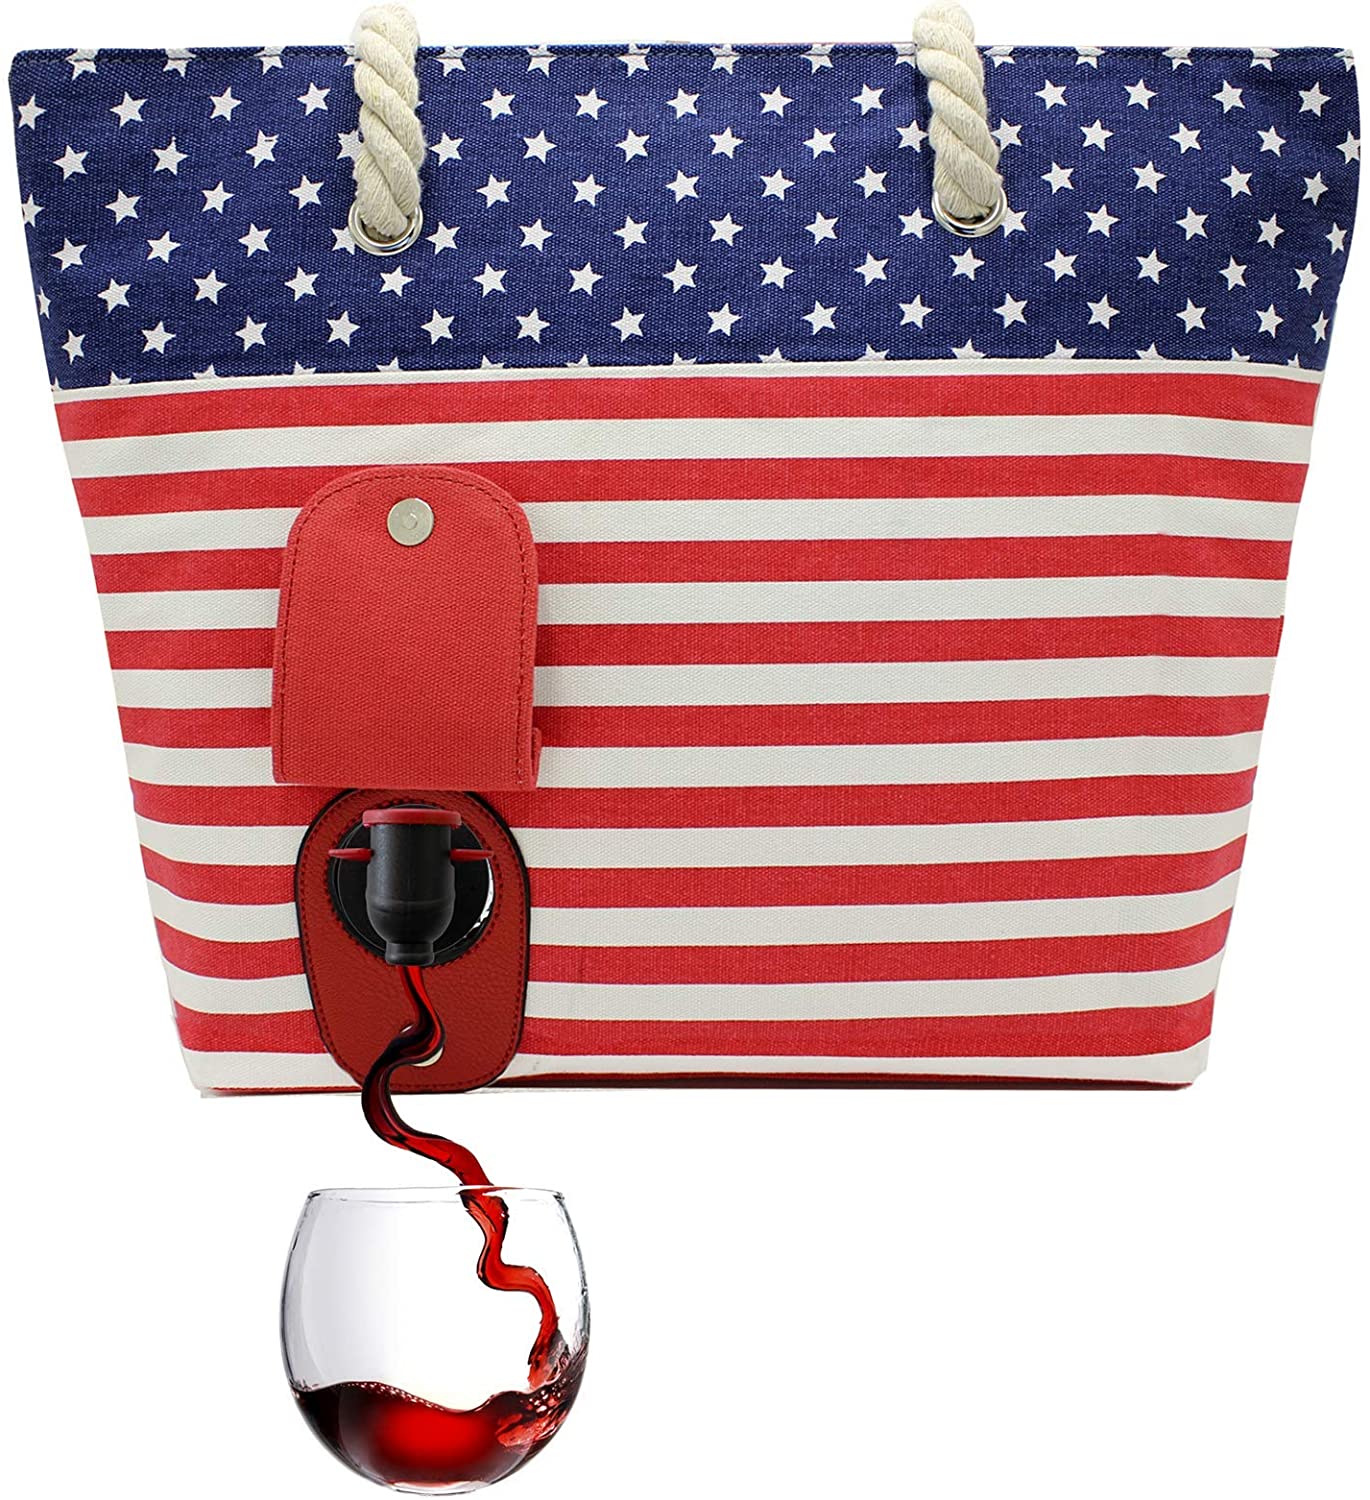 USA PortoVino Beach Wine Purse (Blue:White) - Beach Tote with Hidden, Insulated Compartment, Holds 2 Bottles of Wine! : Great Gift! : Happiness Guaranteed!